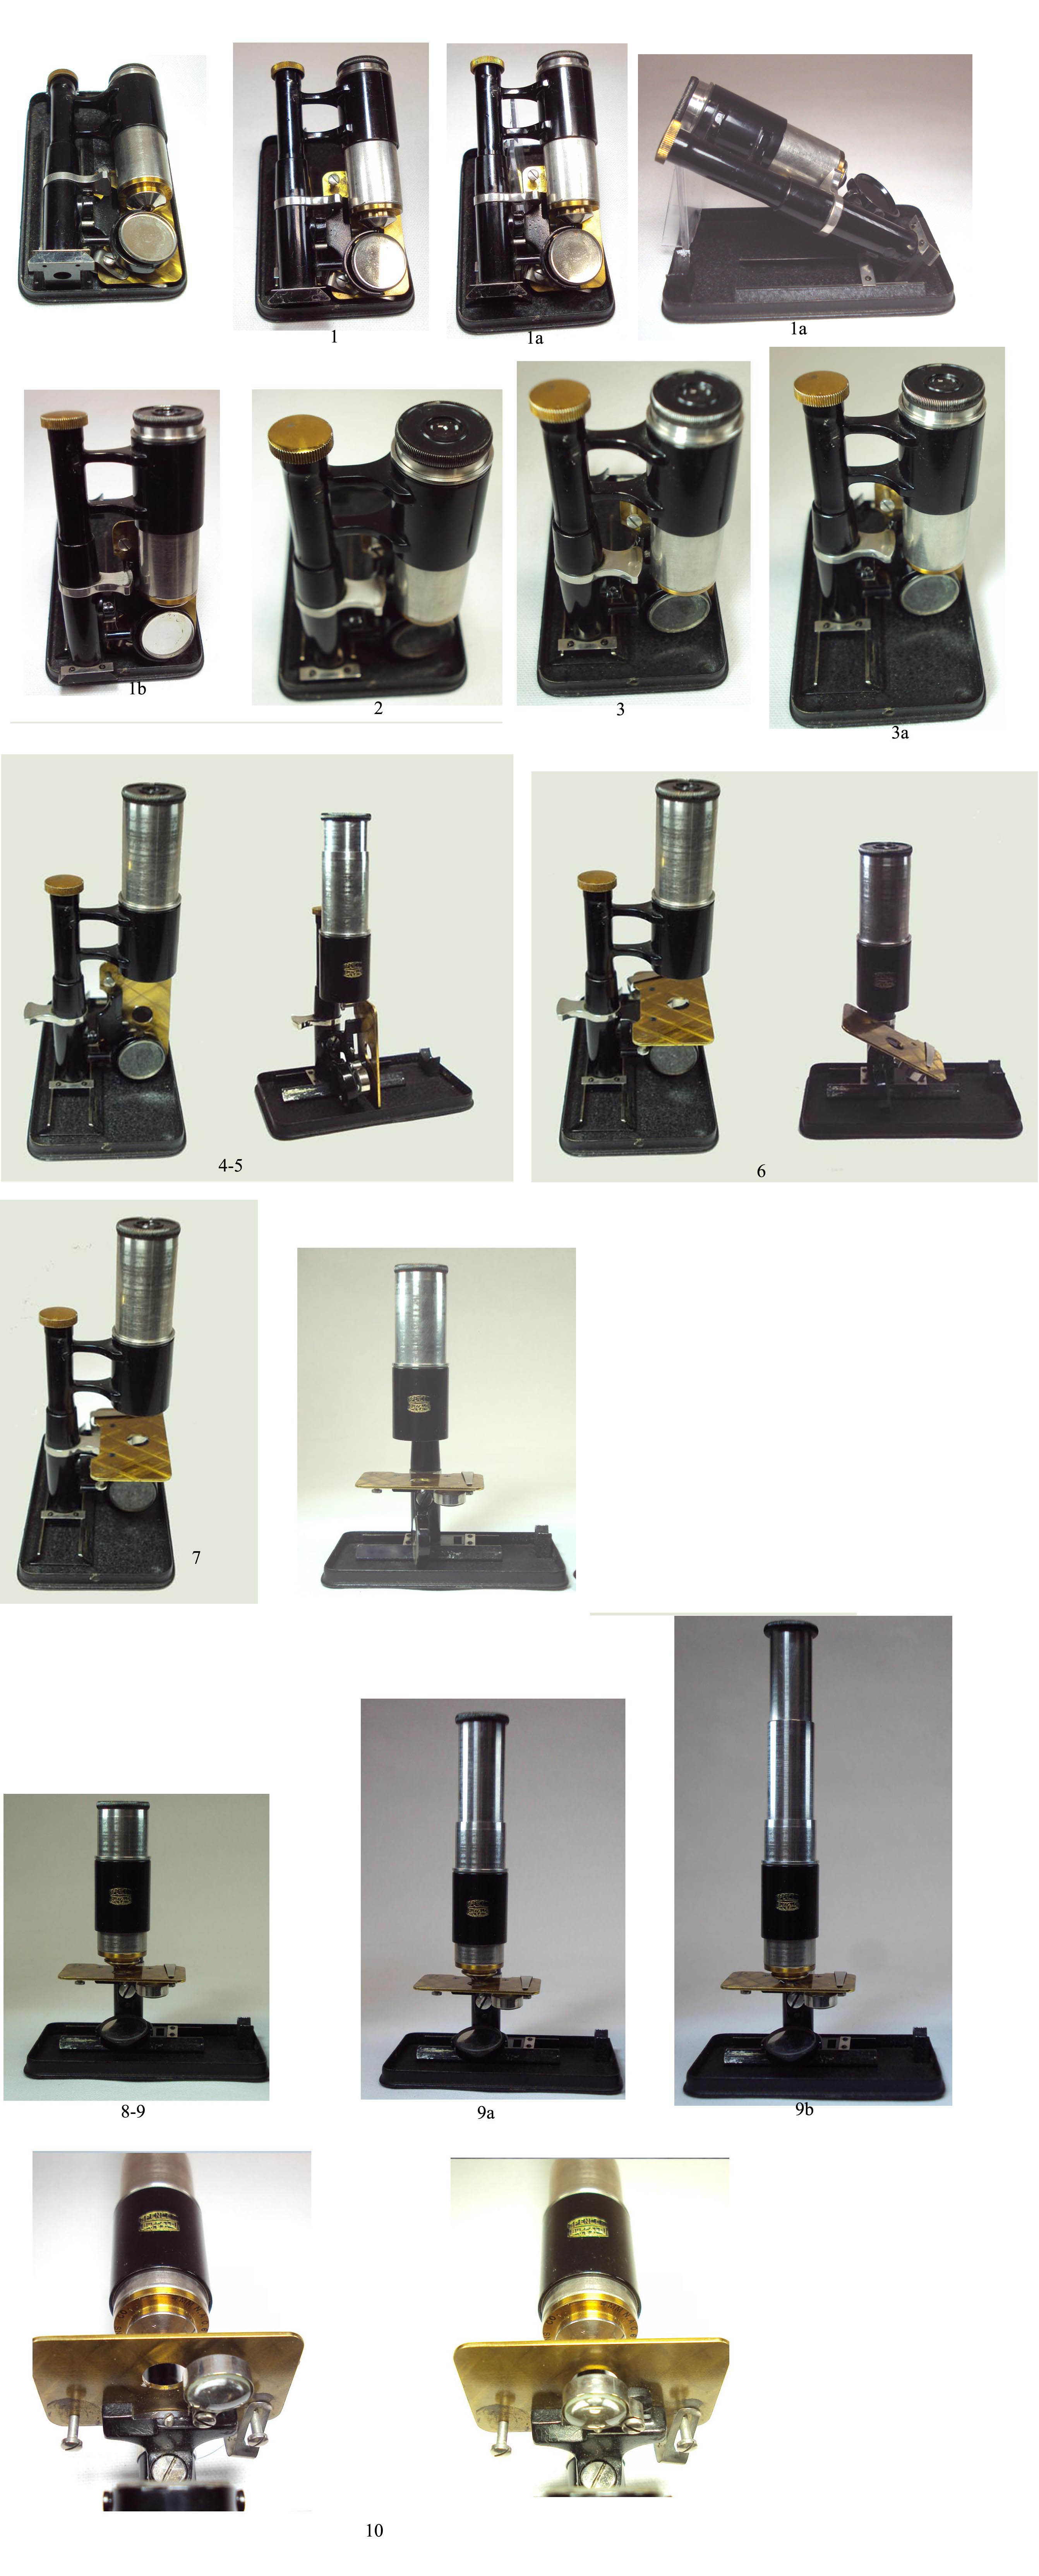 Sequence to show how Microscope is erected